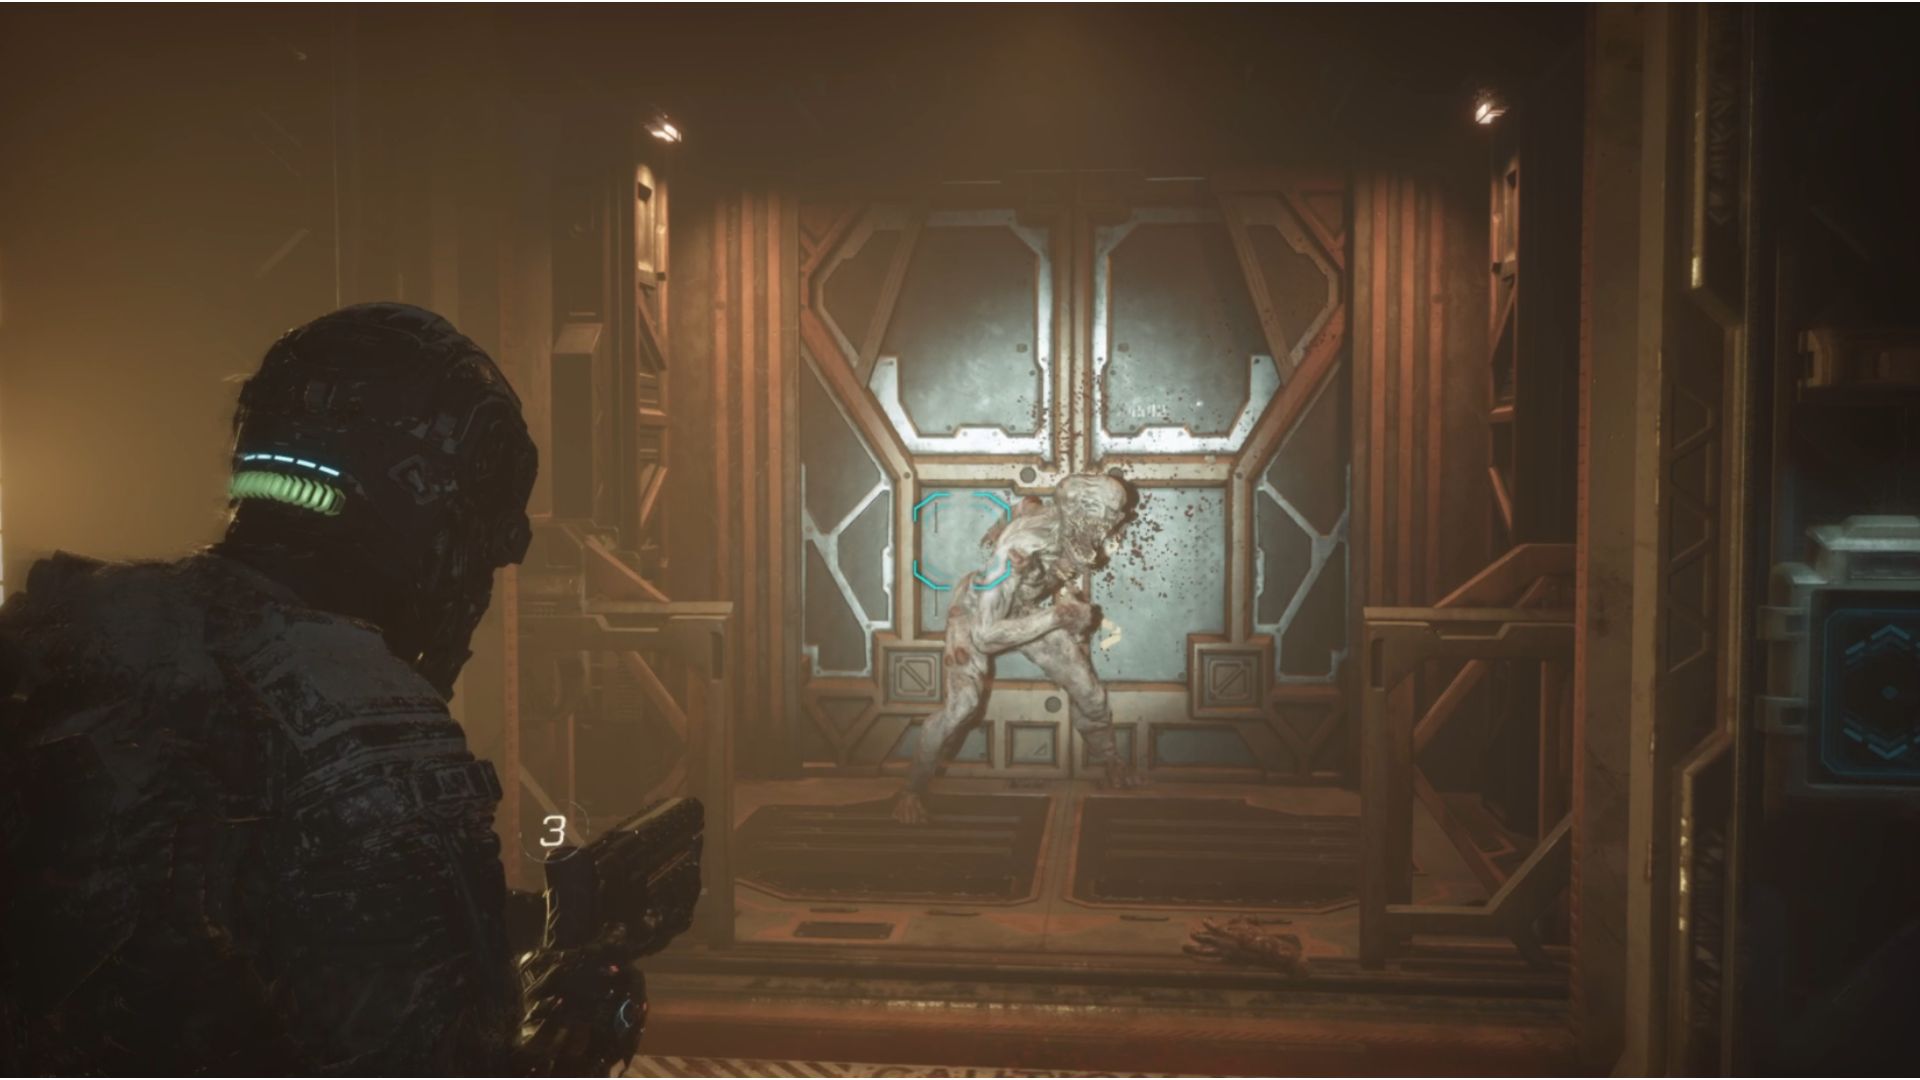 The Callisto Protocol Weapons: Jacob can be seen holding the Riot Gun